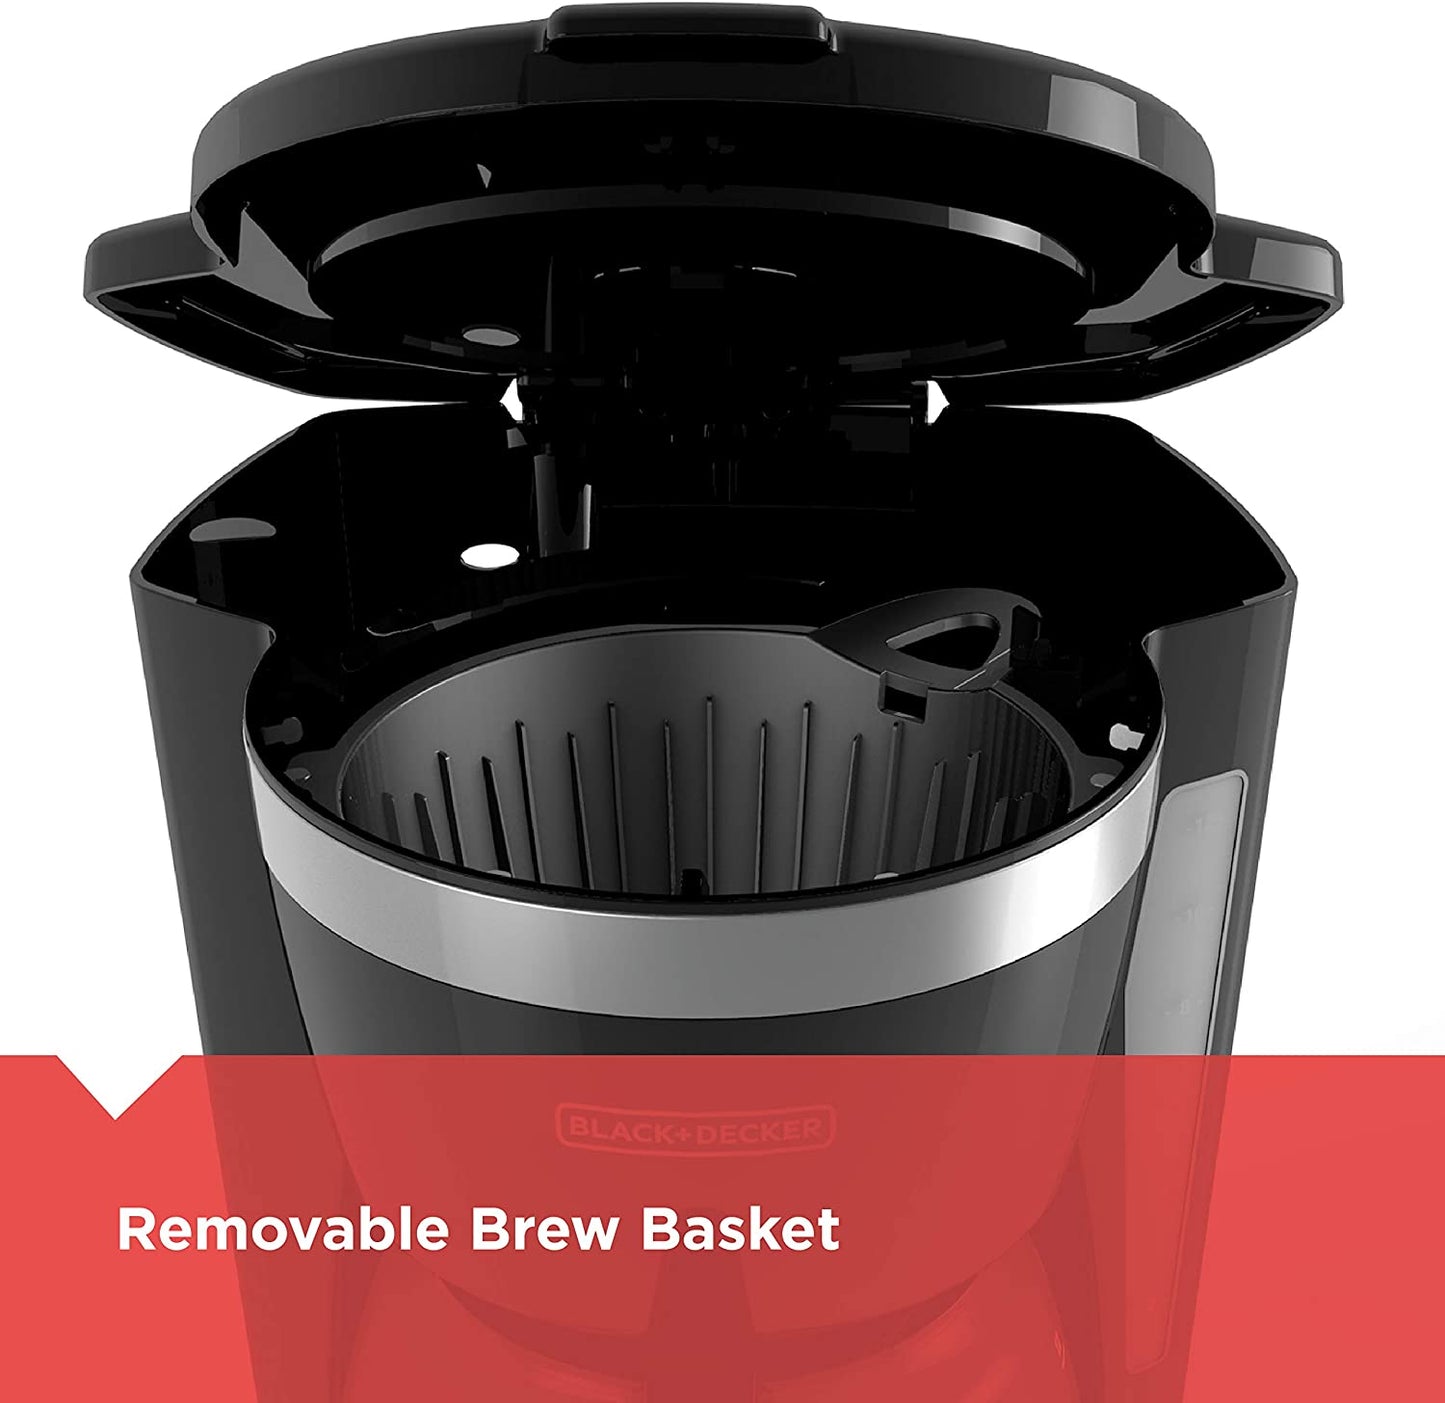 12-Cup Digital Coffee Maker, CM1160B, Programmable, Washable Basket Filter, Sneak-A-Cup, Auto Brew, Water Window, Keep Hot Plate, Black